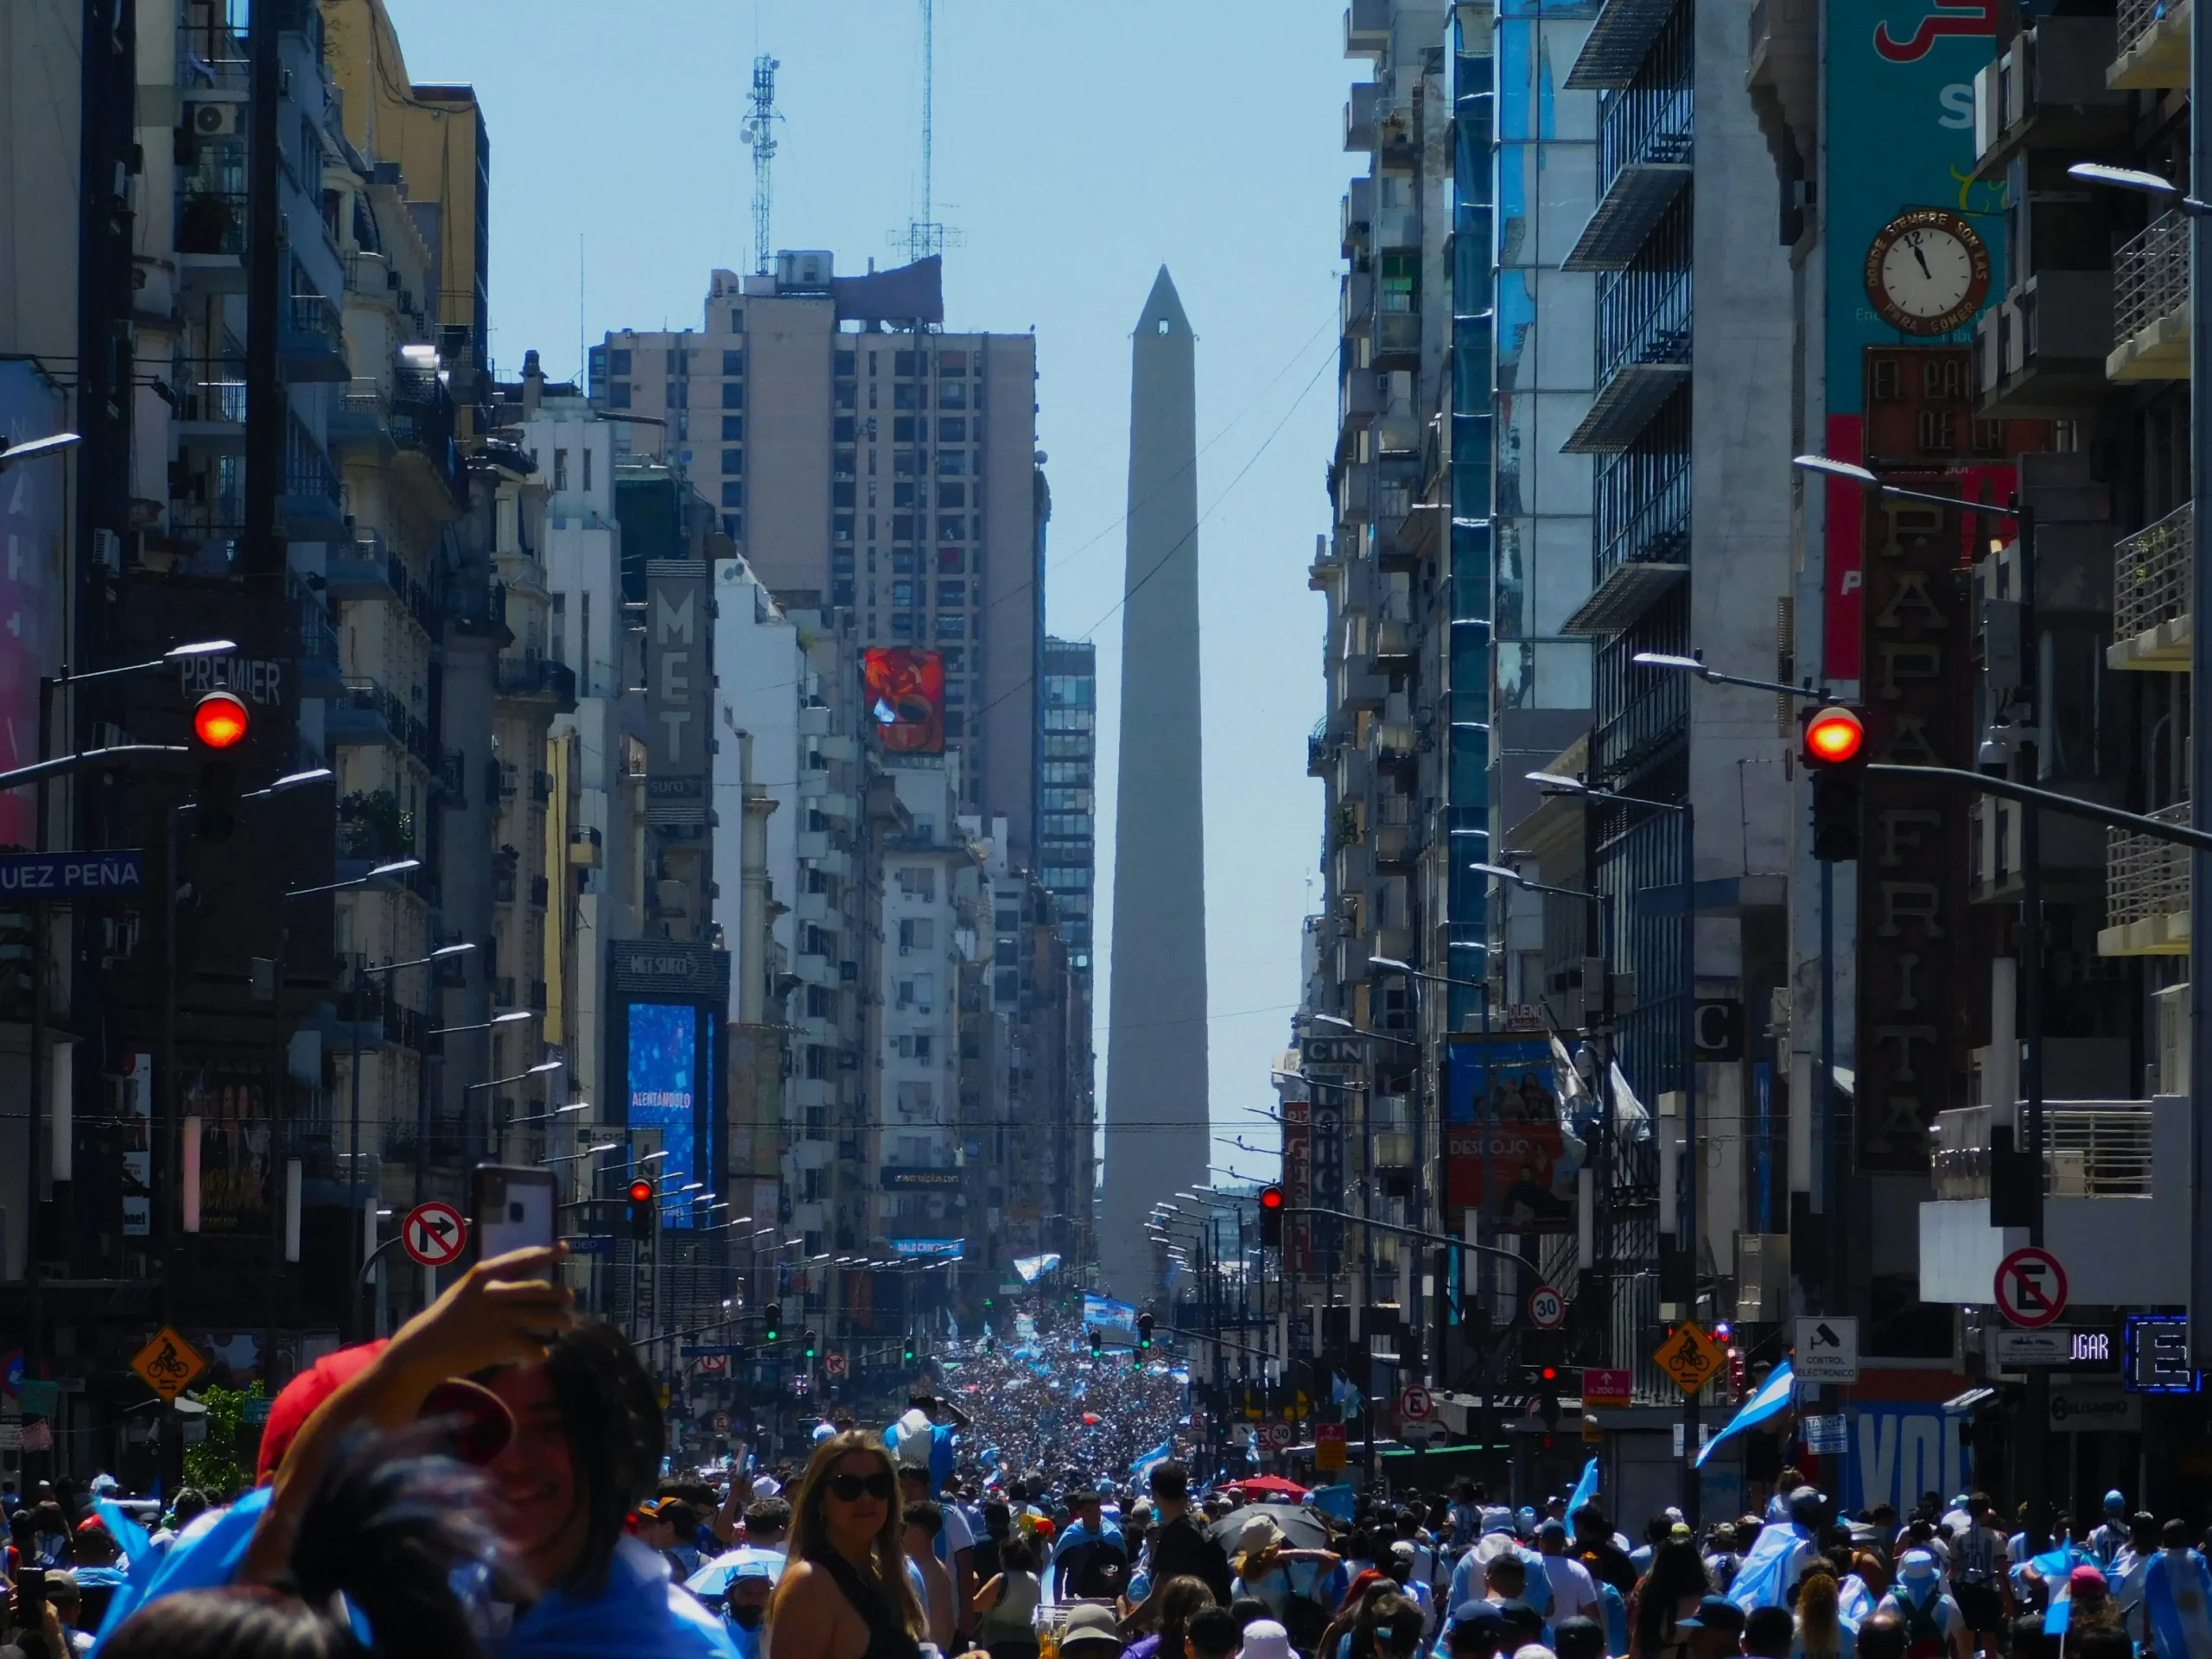 The Ultimate guide to Downtown Buenos Aires